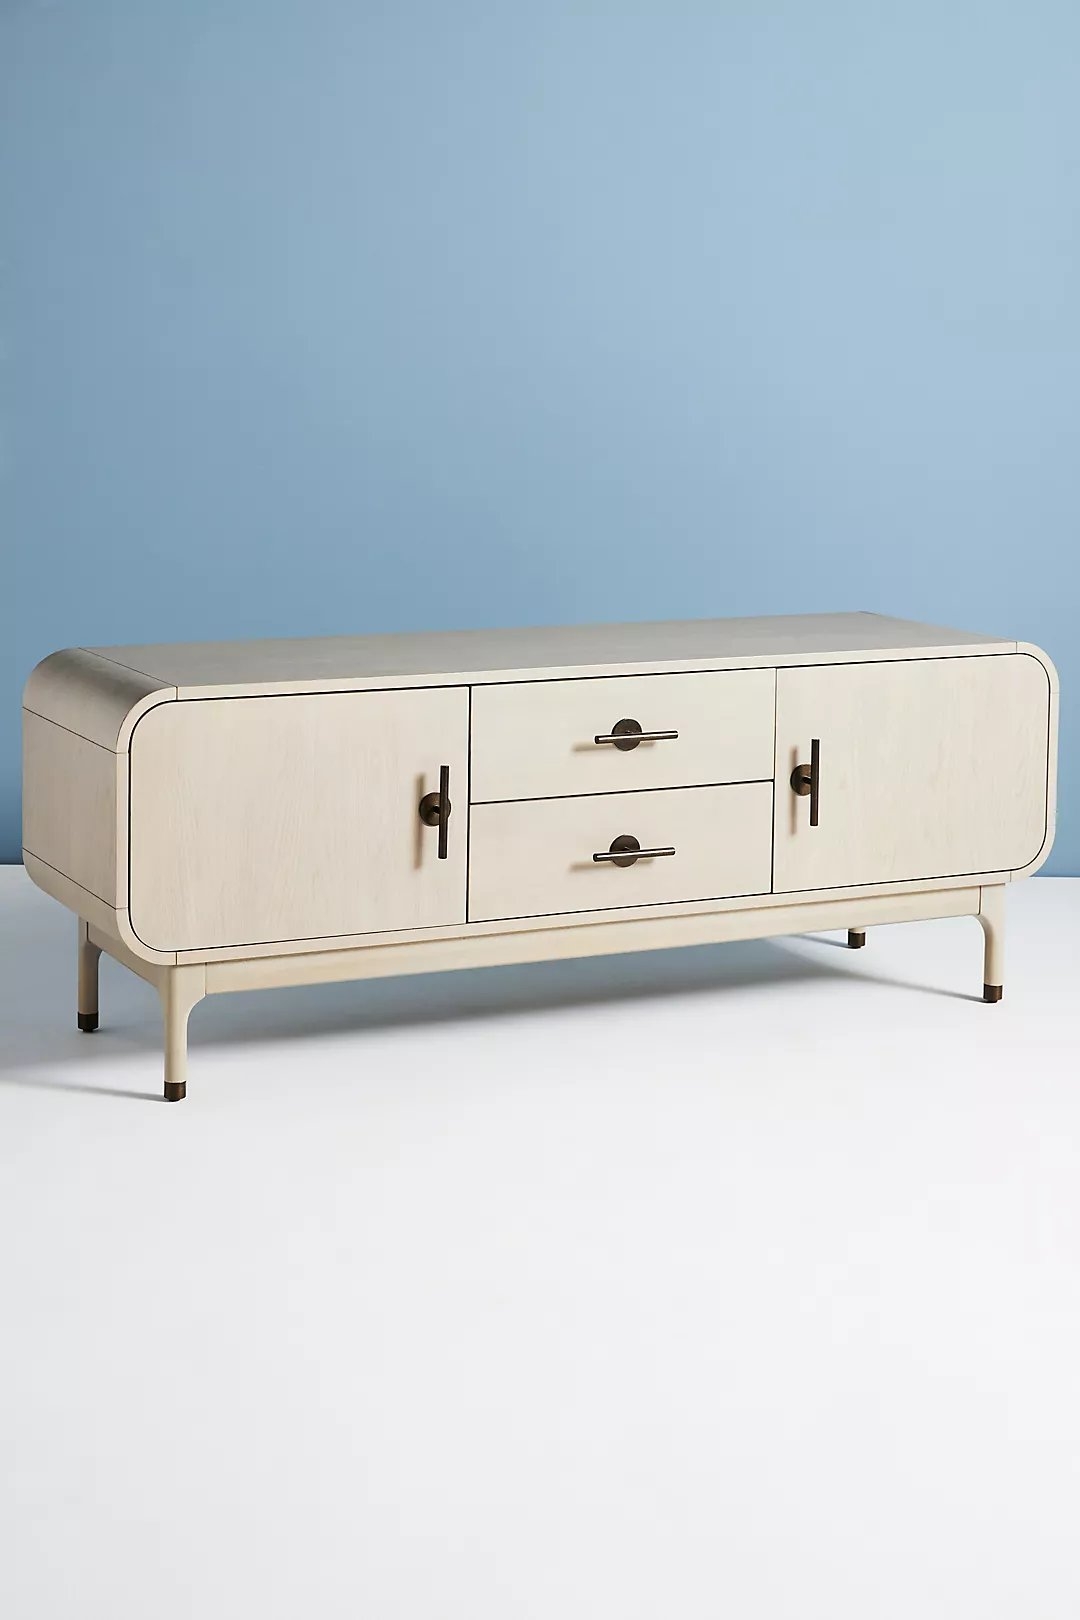 Nora Media Console By Anthropologie in Grey - Image 1